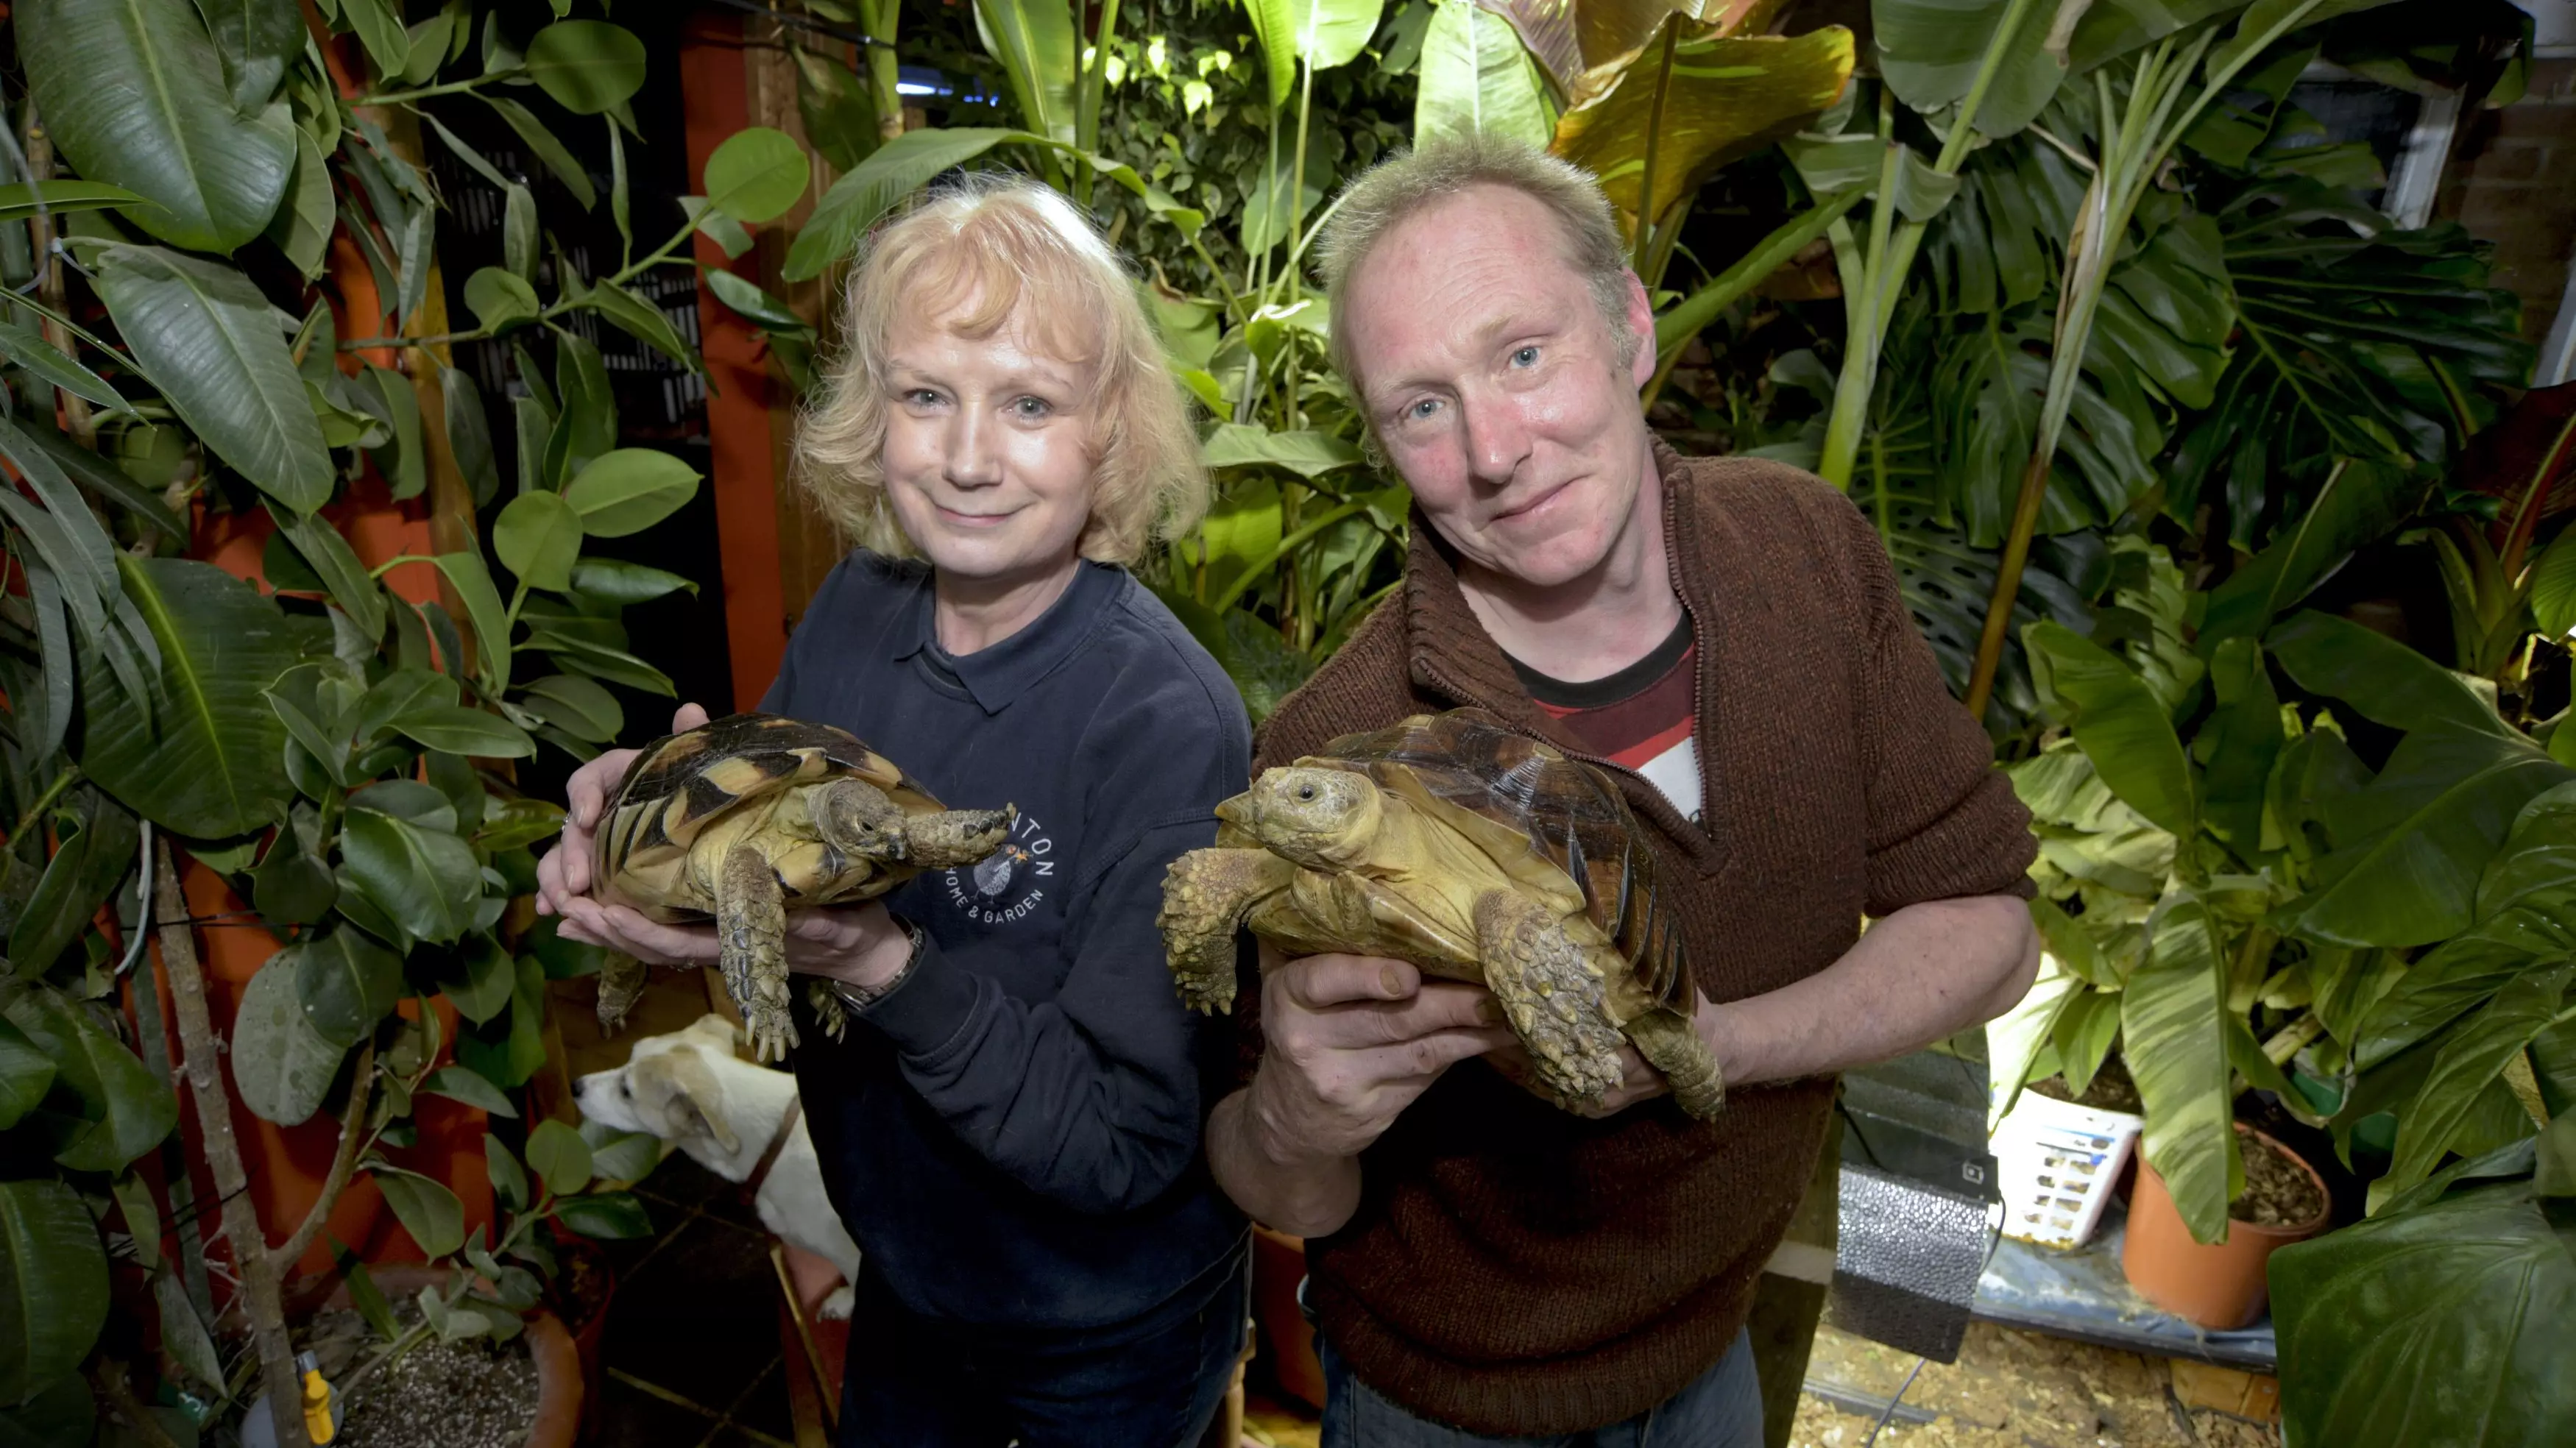 Couple Complain They're Kept Awake By Sounds Of Mating Animals In £22,000 Home Zoo